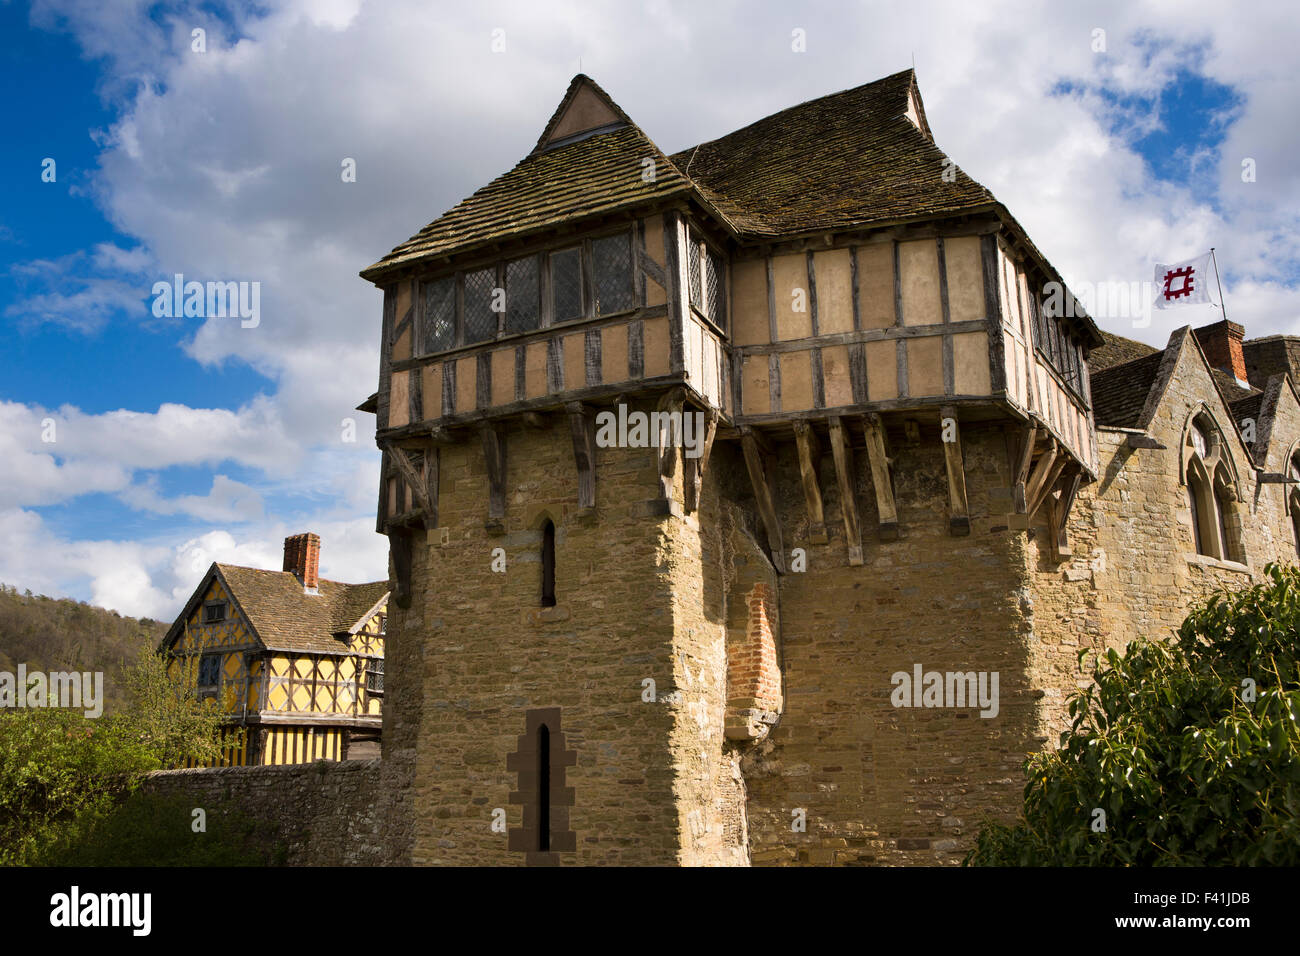 UK, England, Shropshire, Craven Arms, Stokesay Castle North Tower Stock Photo